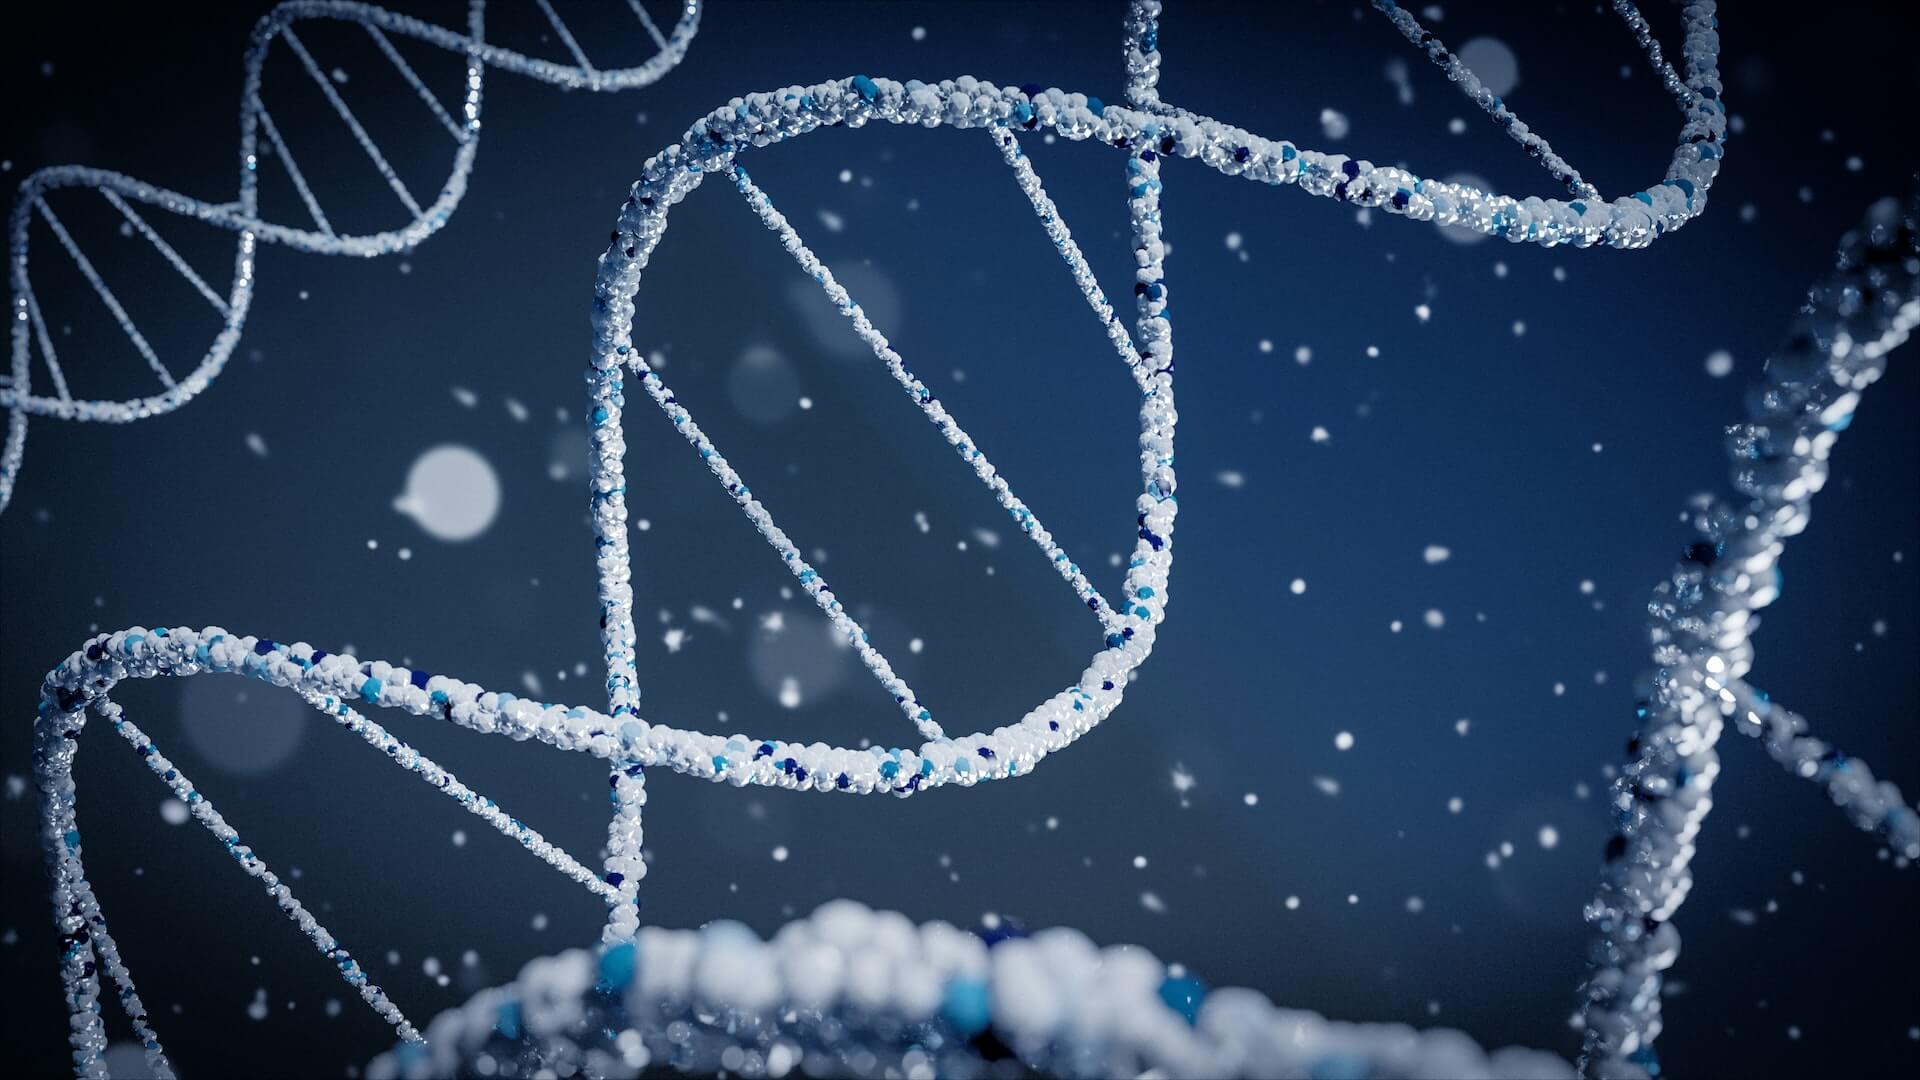 silver and blue double-stranded DNA